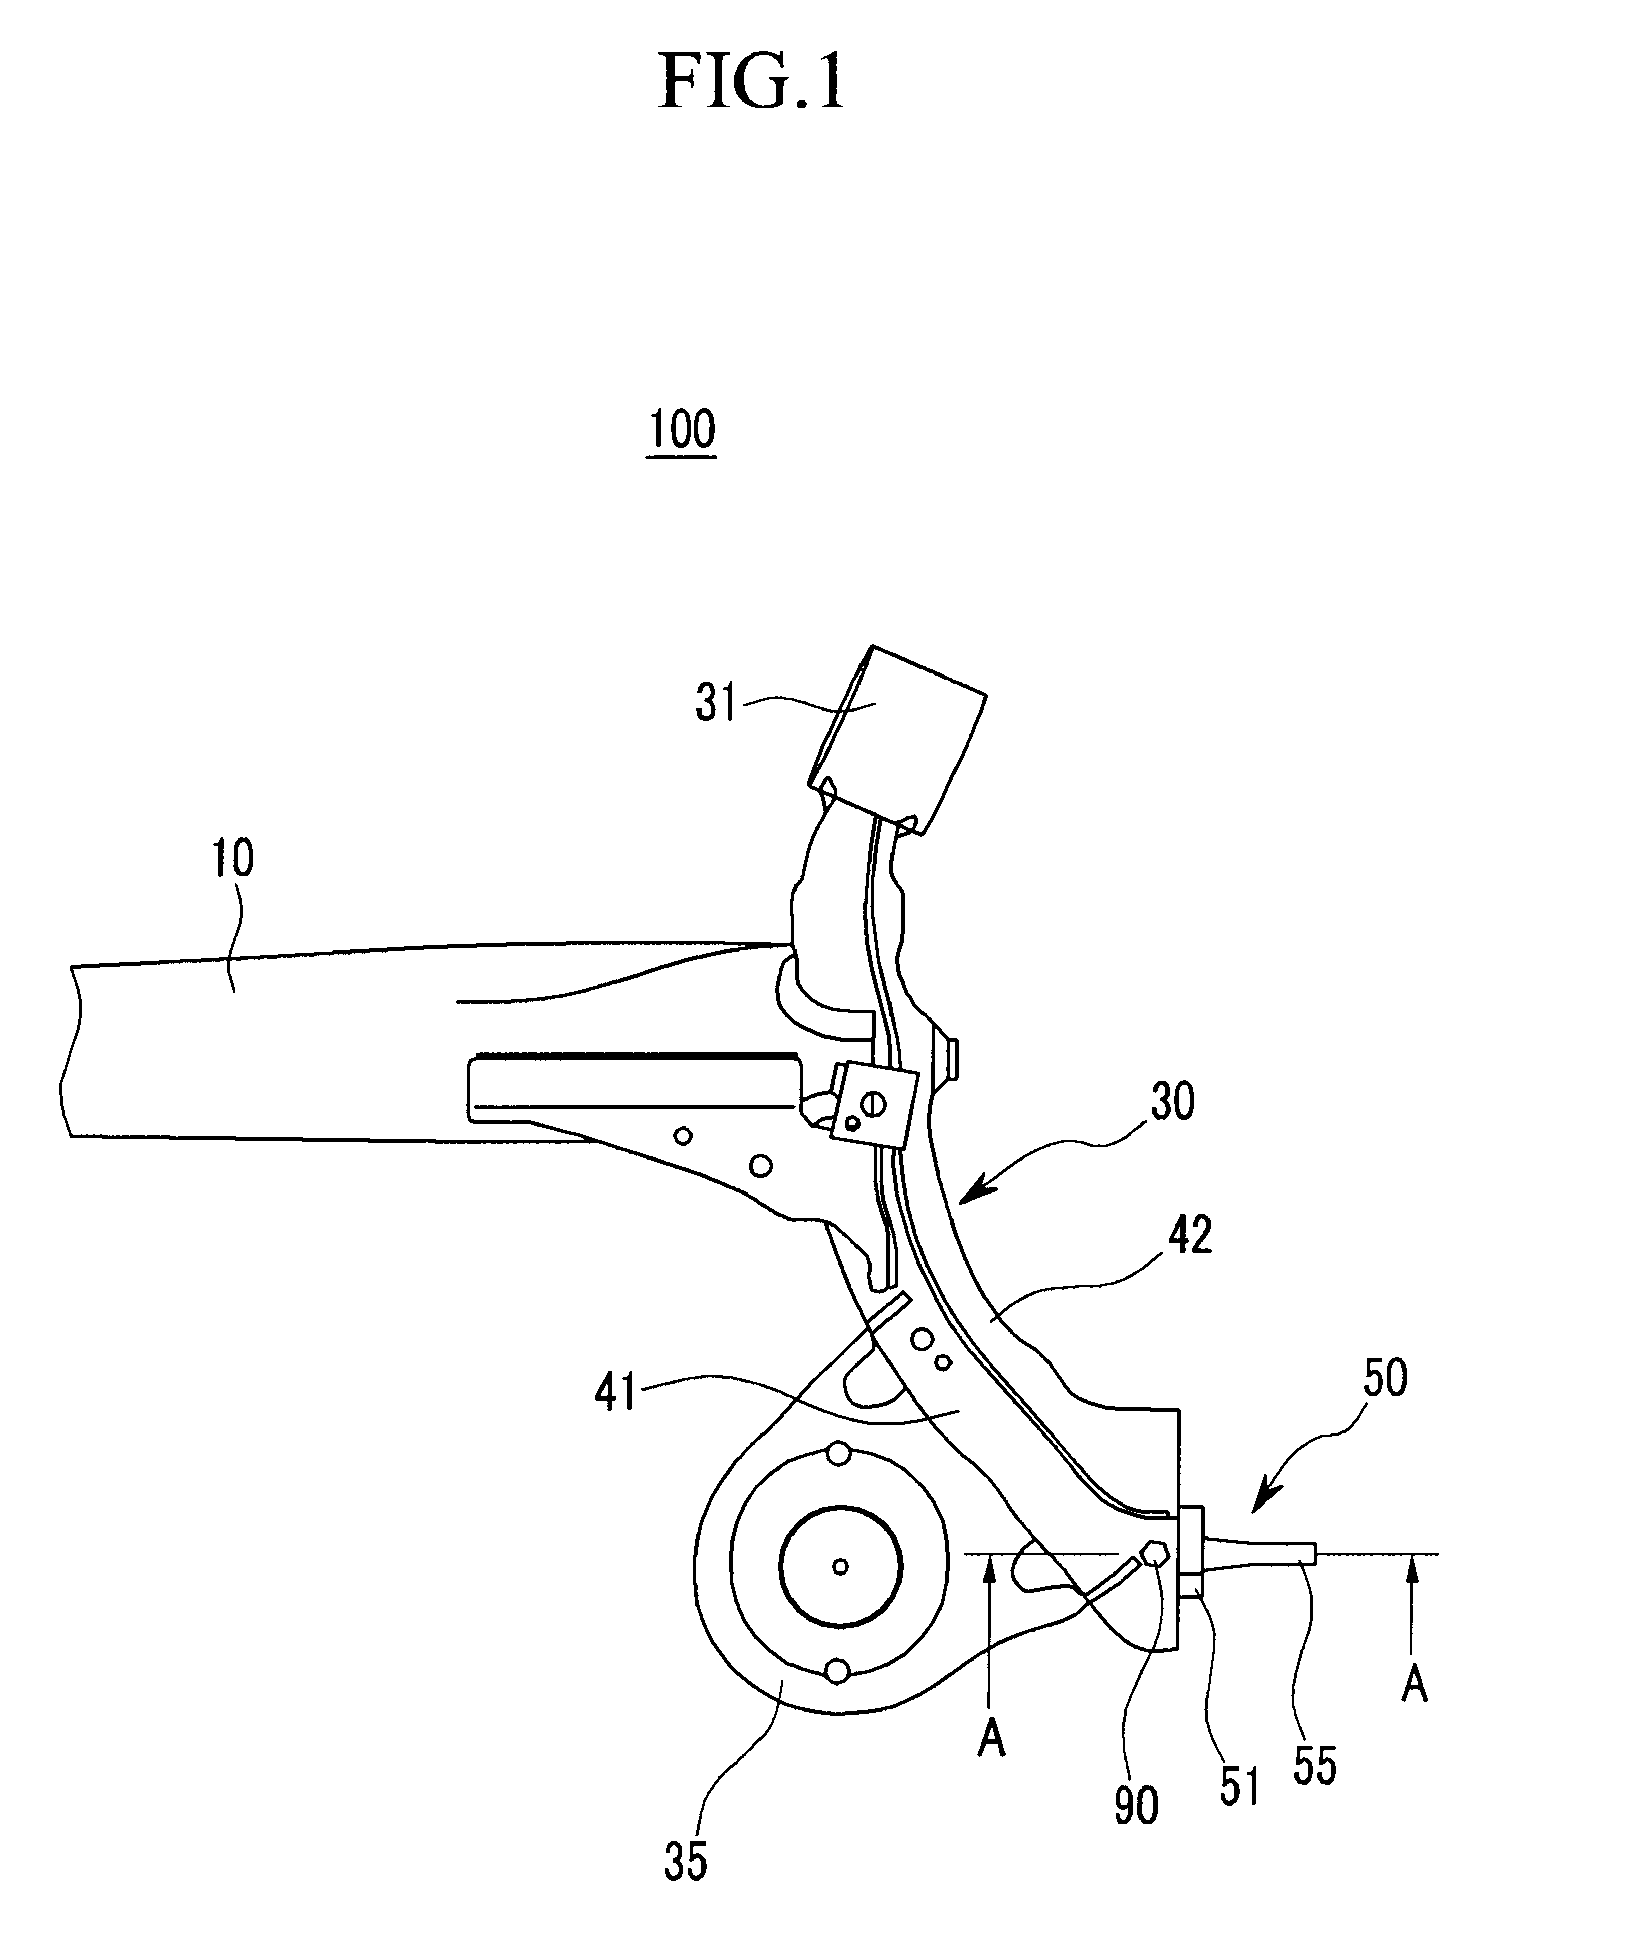 Suspension System of Coupled Torsion Beam Axle